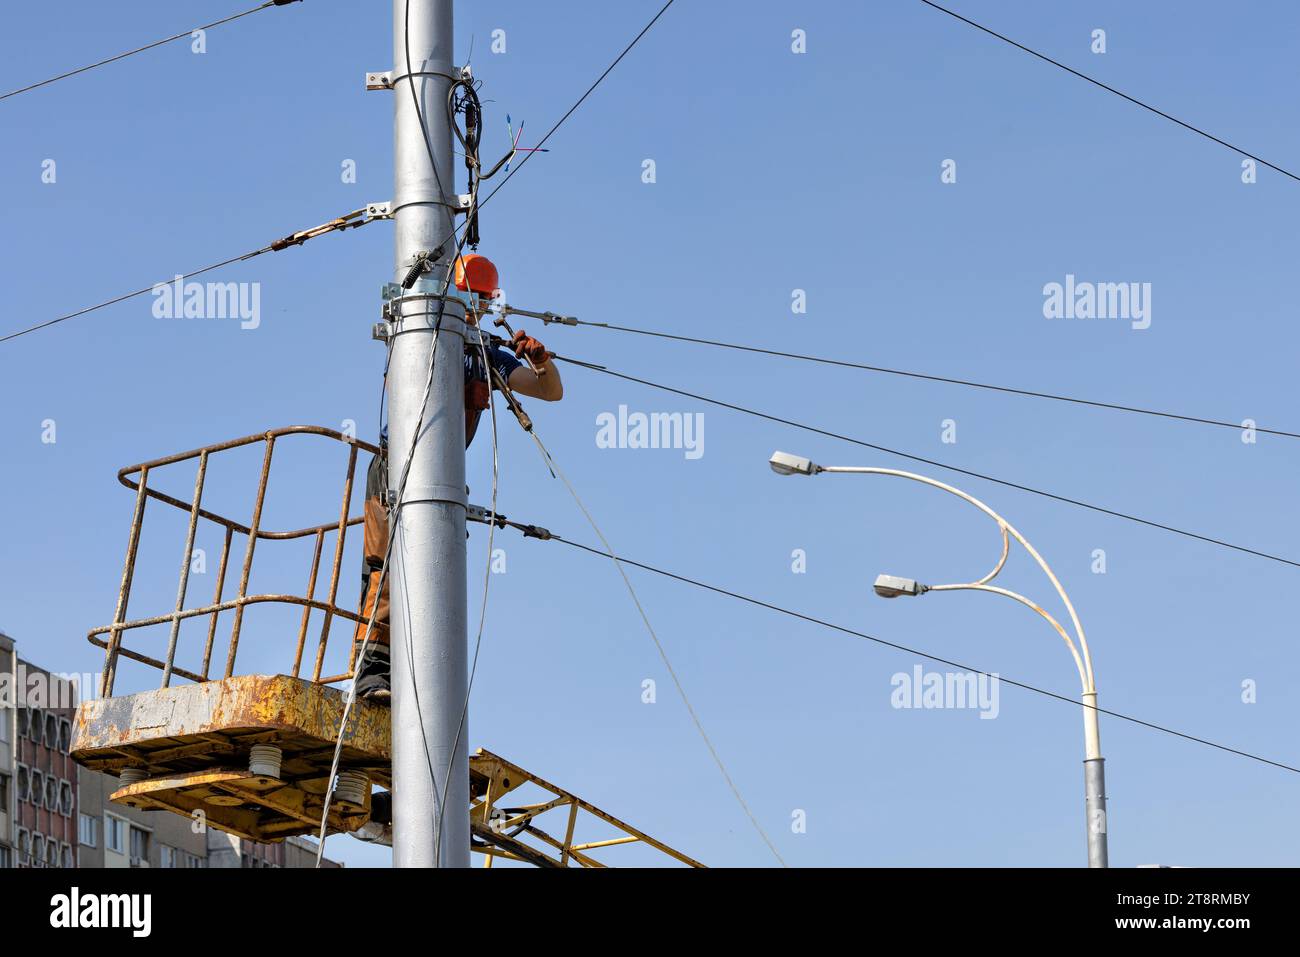 A worker tensions and secures a cable on a lamp post while standing in a lifting construction basket against a blue sky. Stock Photo